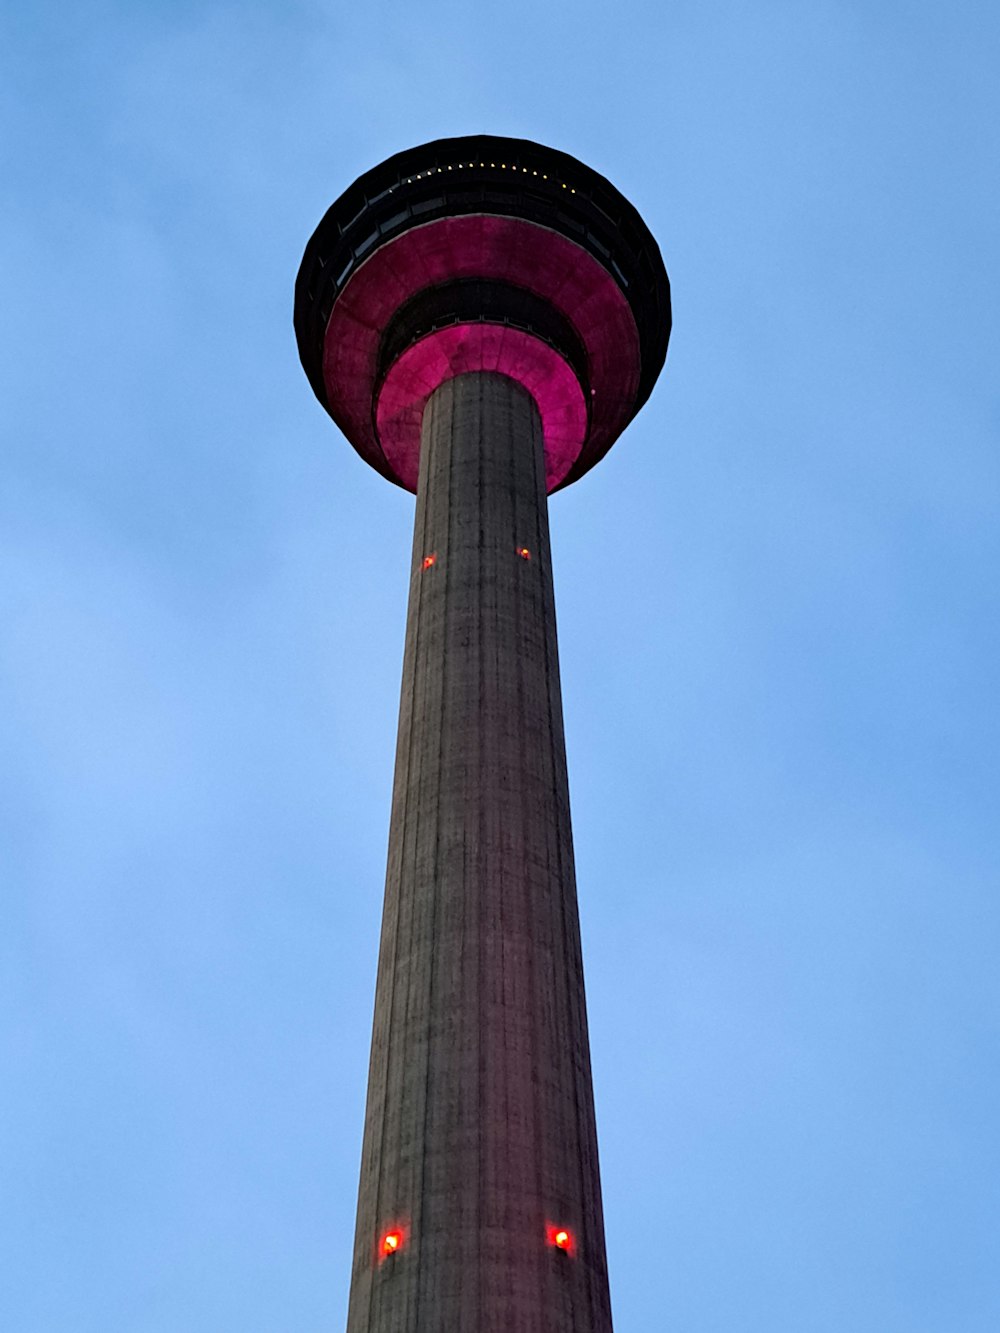 a tall tower with a red light on top